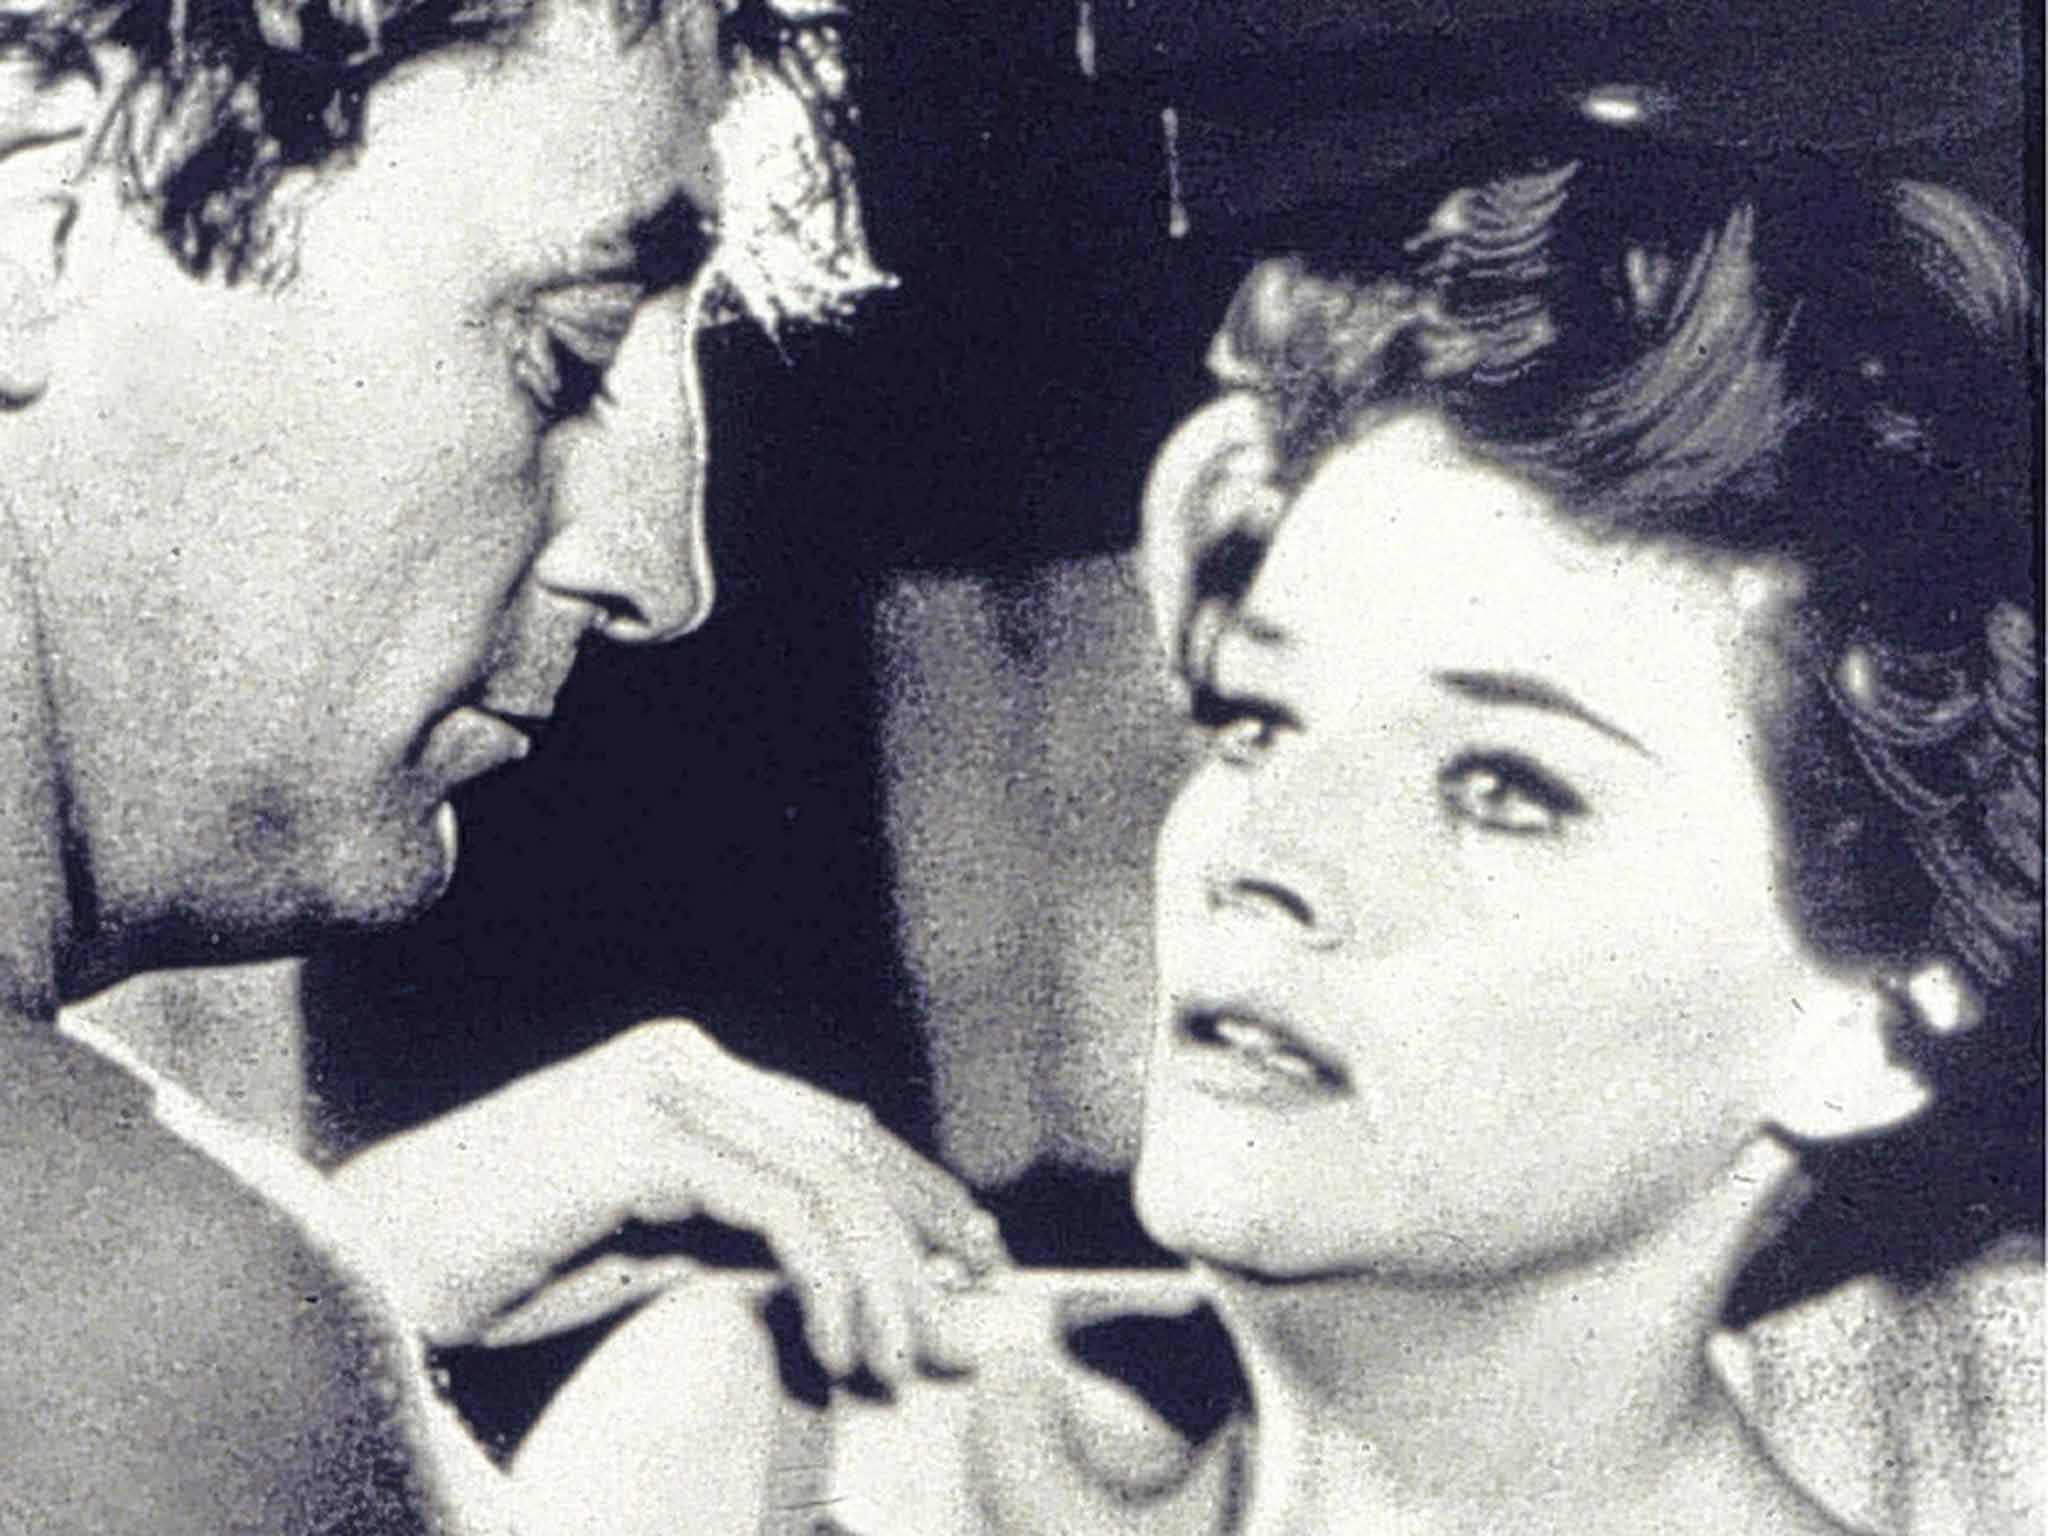 Bergen with Robert Mitchum in 'Cape Fear': she had a cameo in Martin Scorsese's 1991 remake